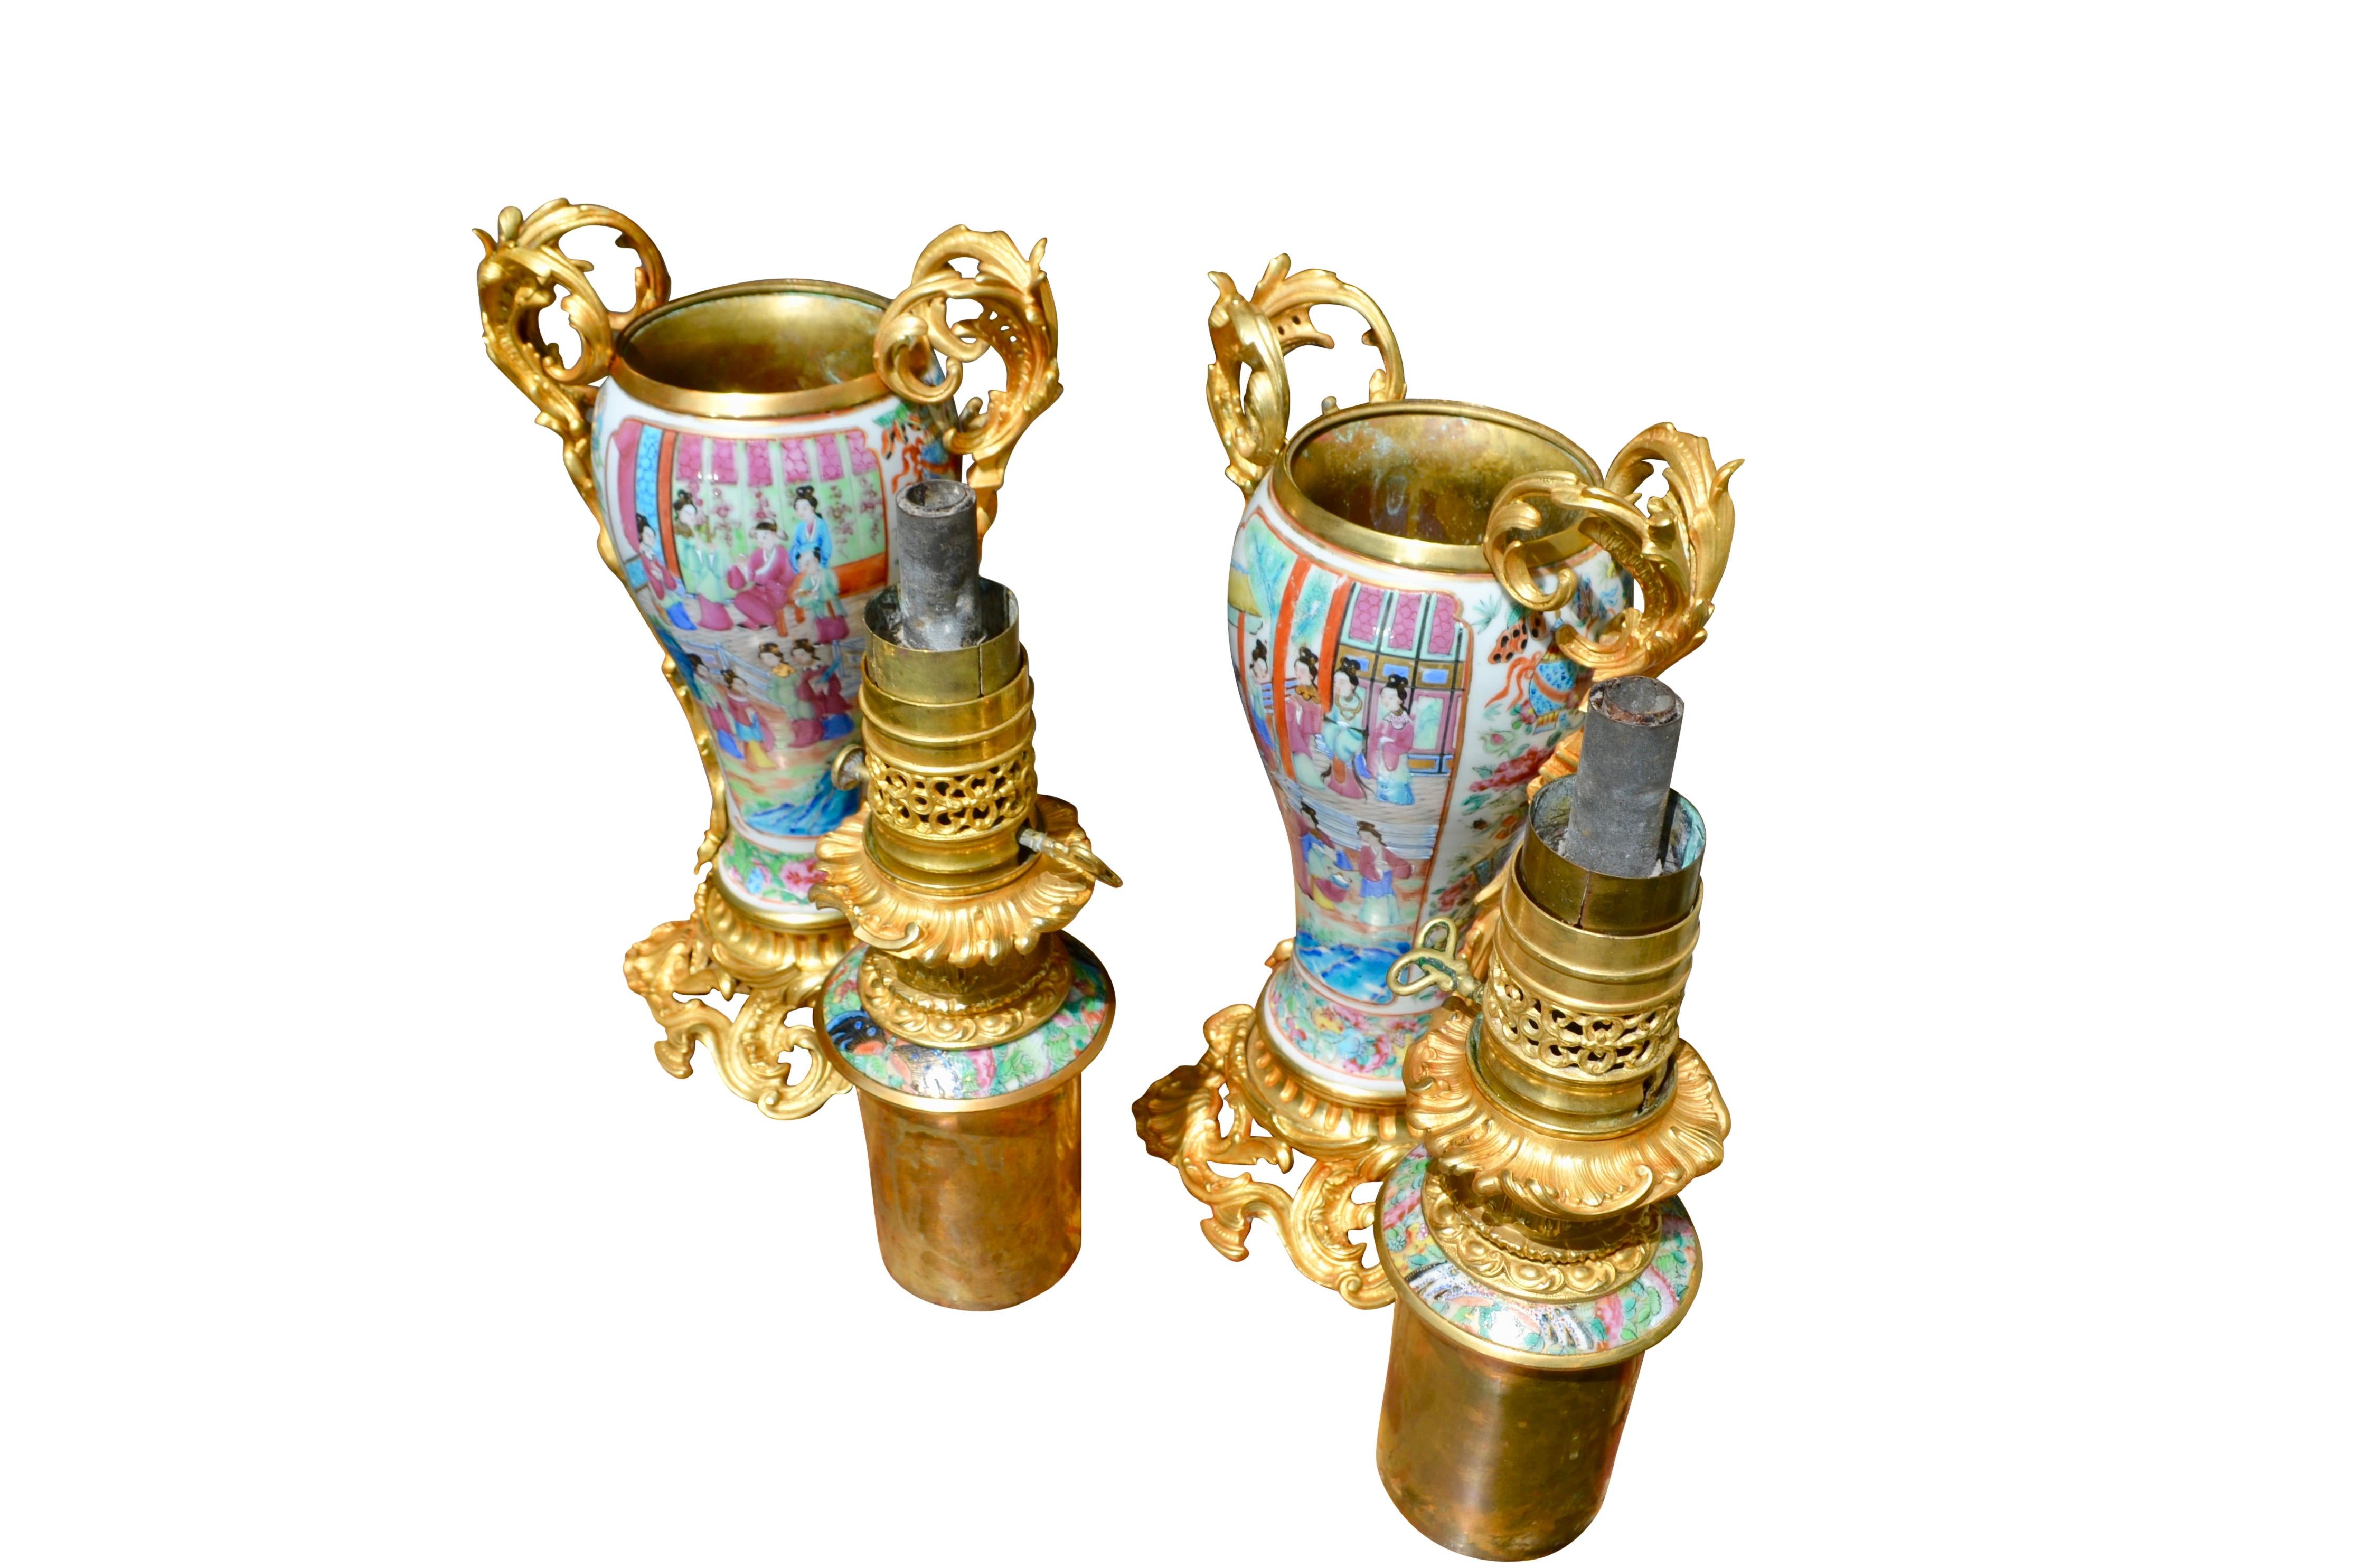 Gilt Rare Pair of Famille Rose Porcelain and Ormolu Napoleon III Oil Lamps For Sale